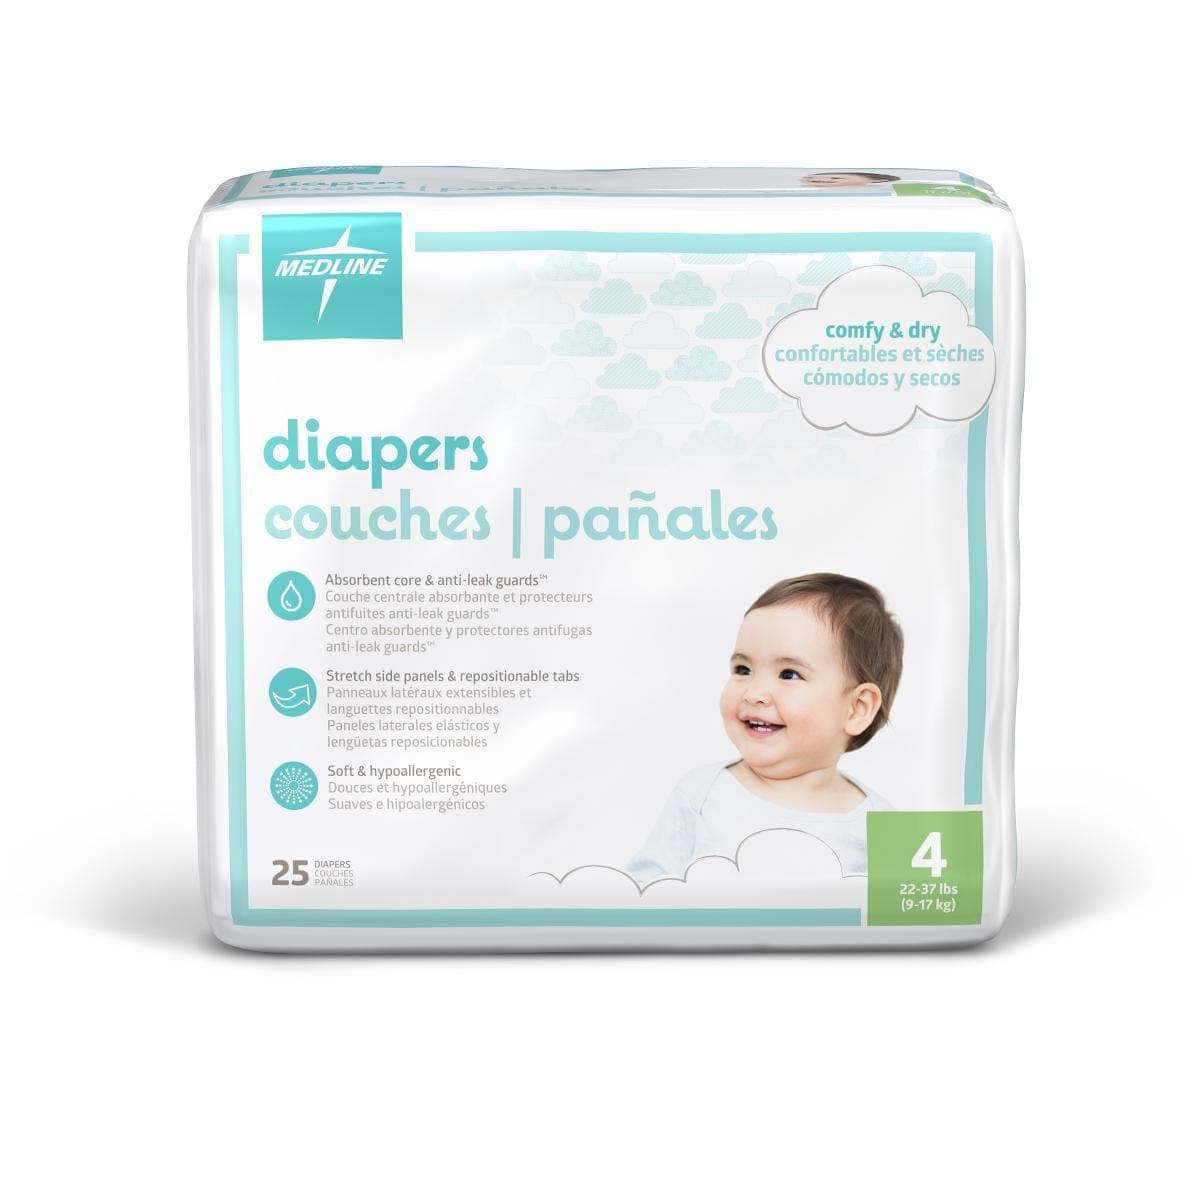 Medline 22-37 lbs / Case of 200 Medline Disposable Baby Diapers